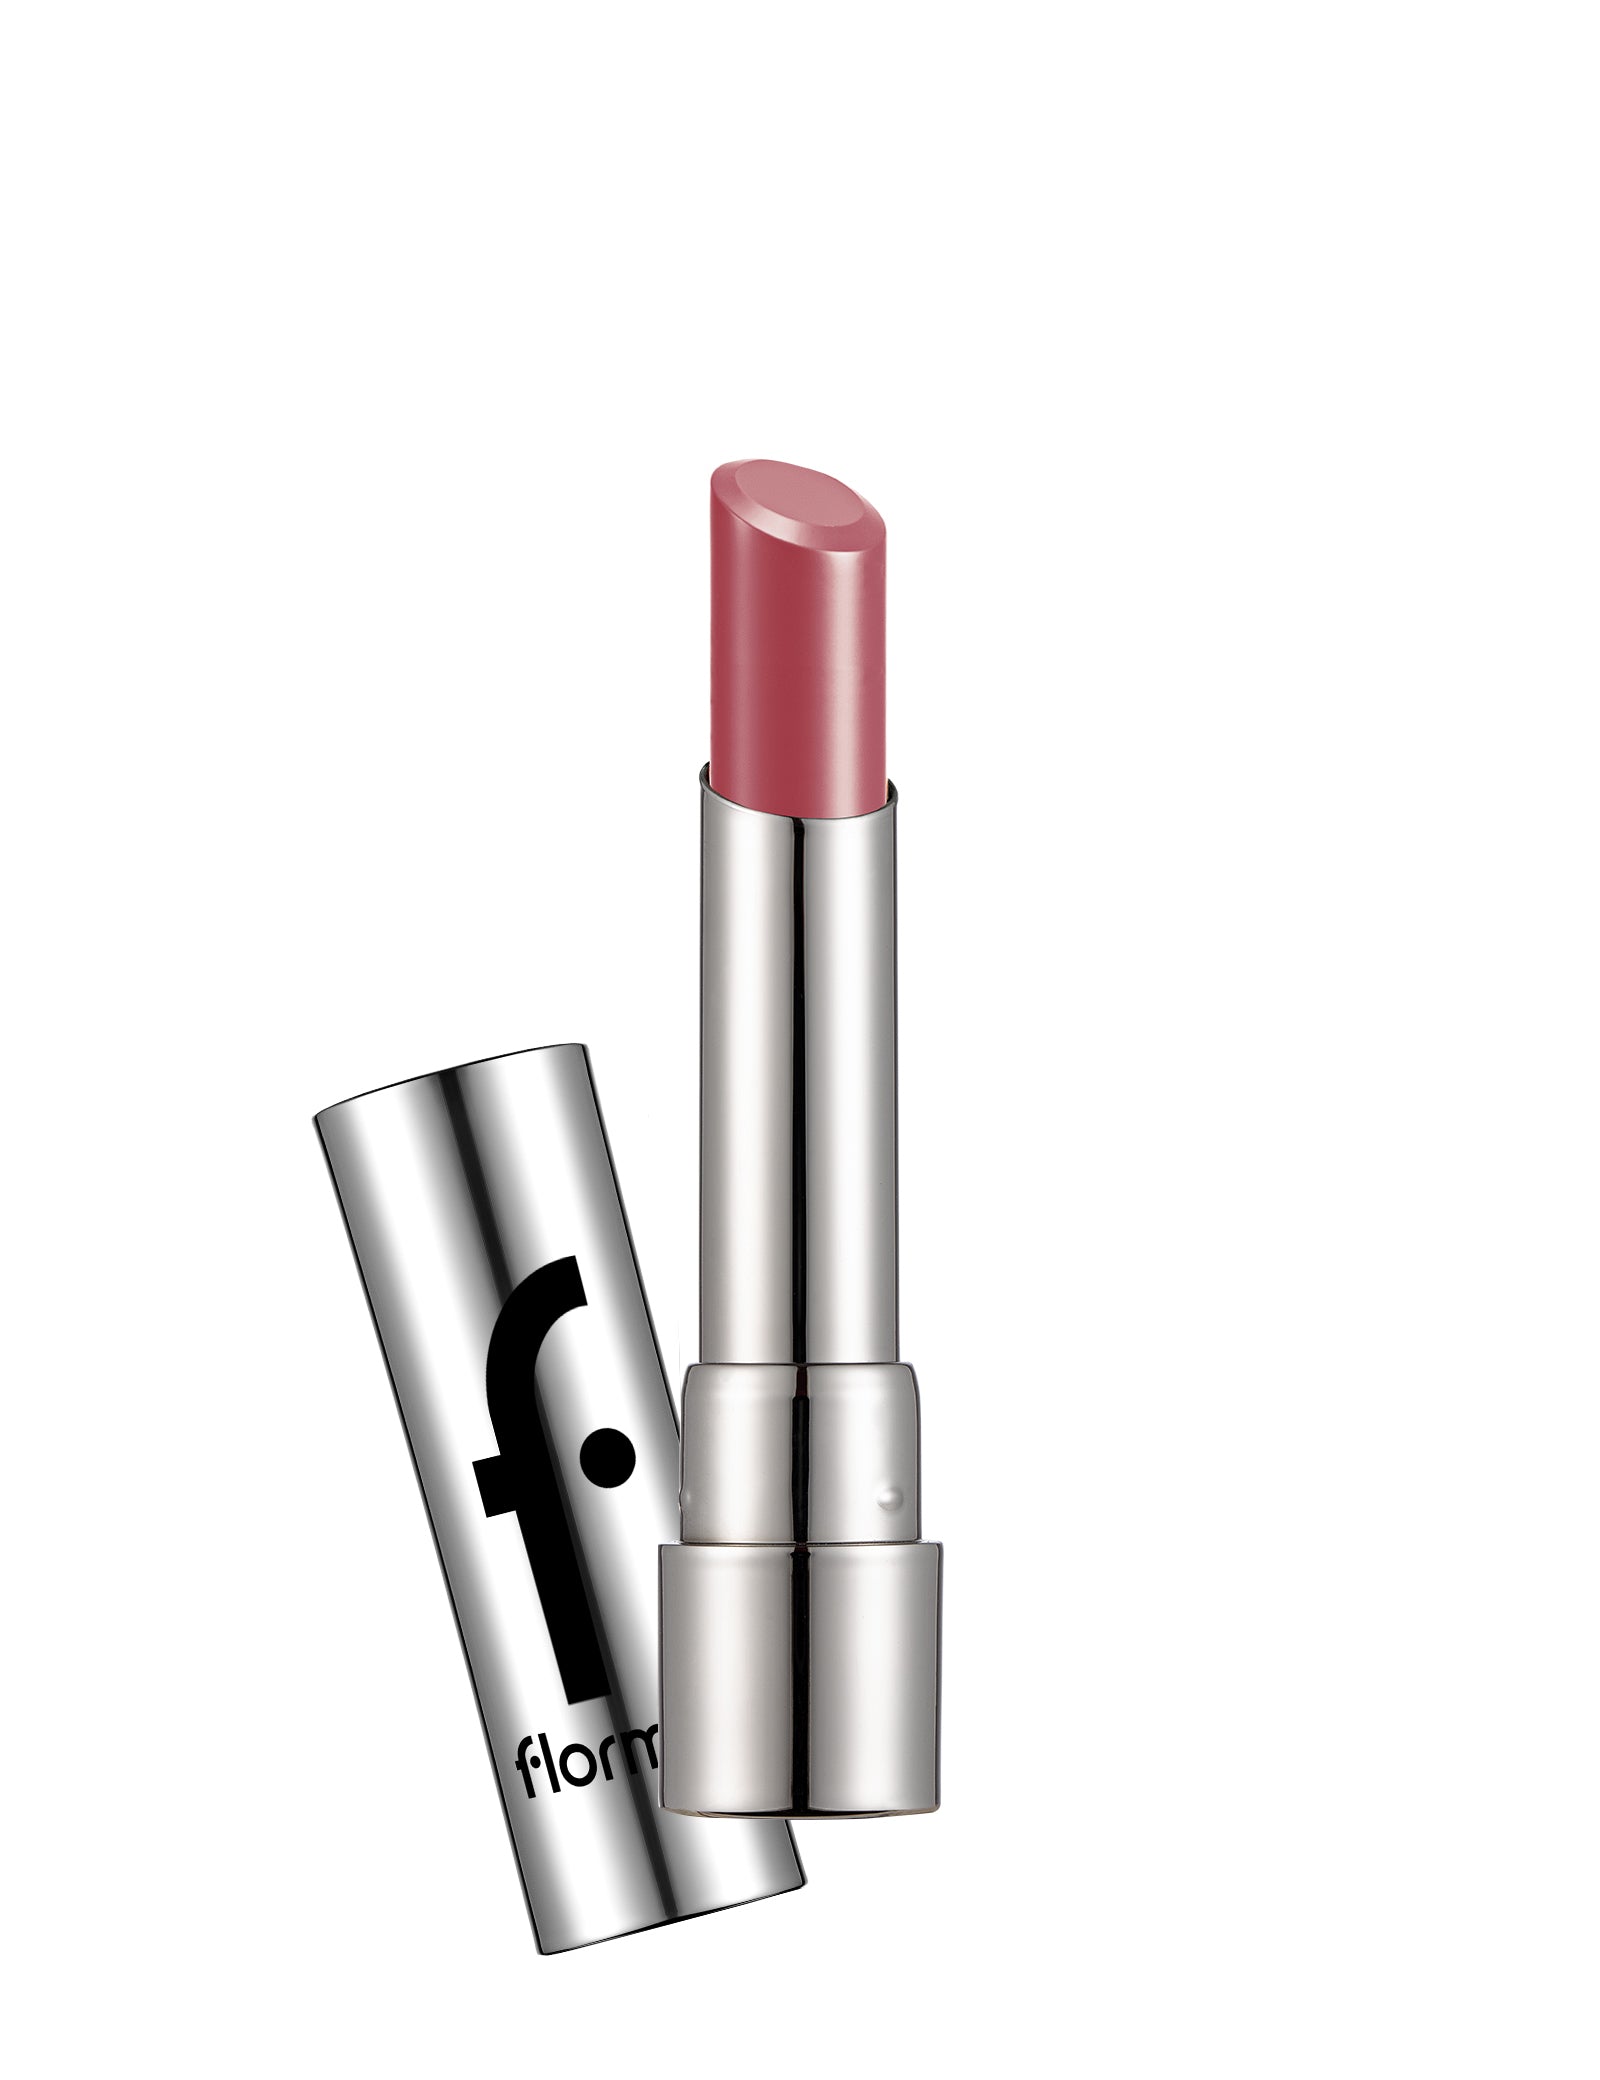 Flormar Sheer Up Lipstick 011 Rosy Lost - New